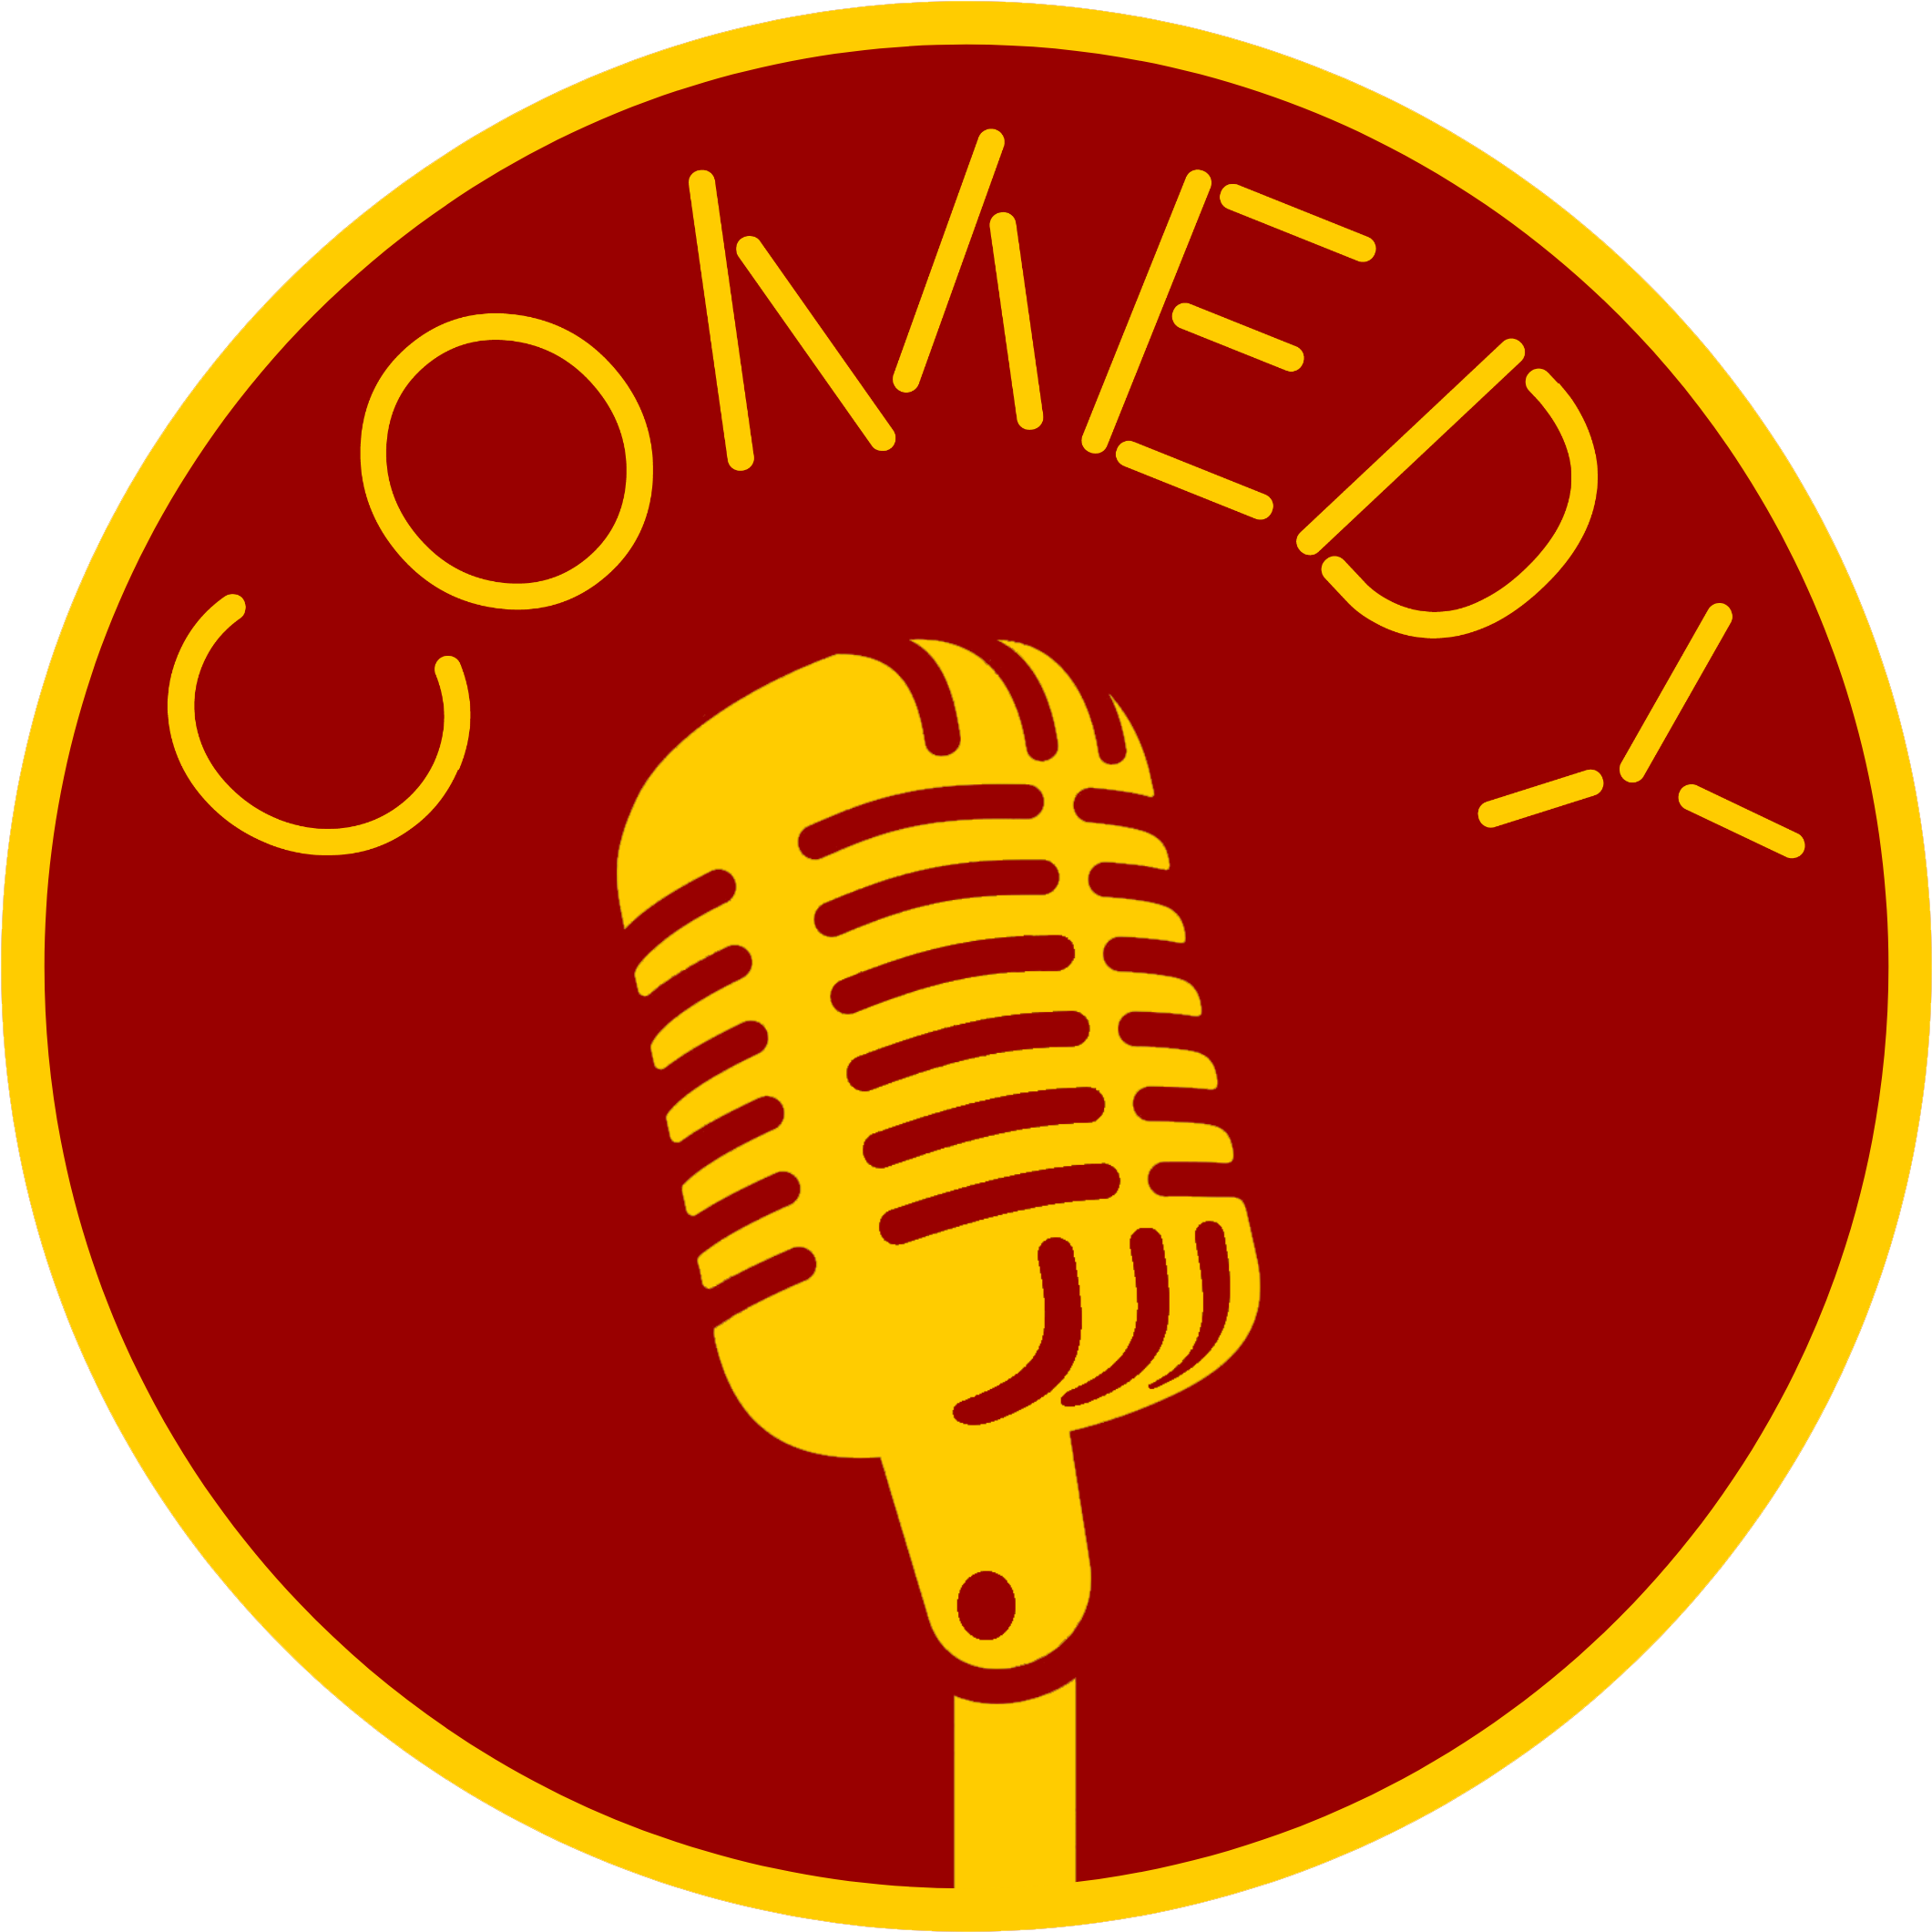 A Logo With A Microphone